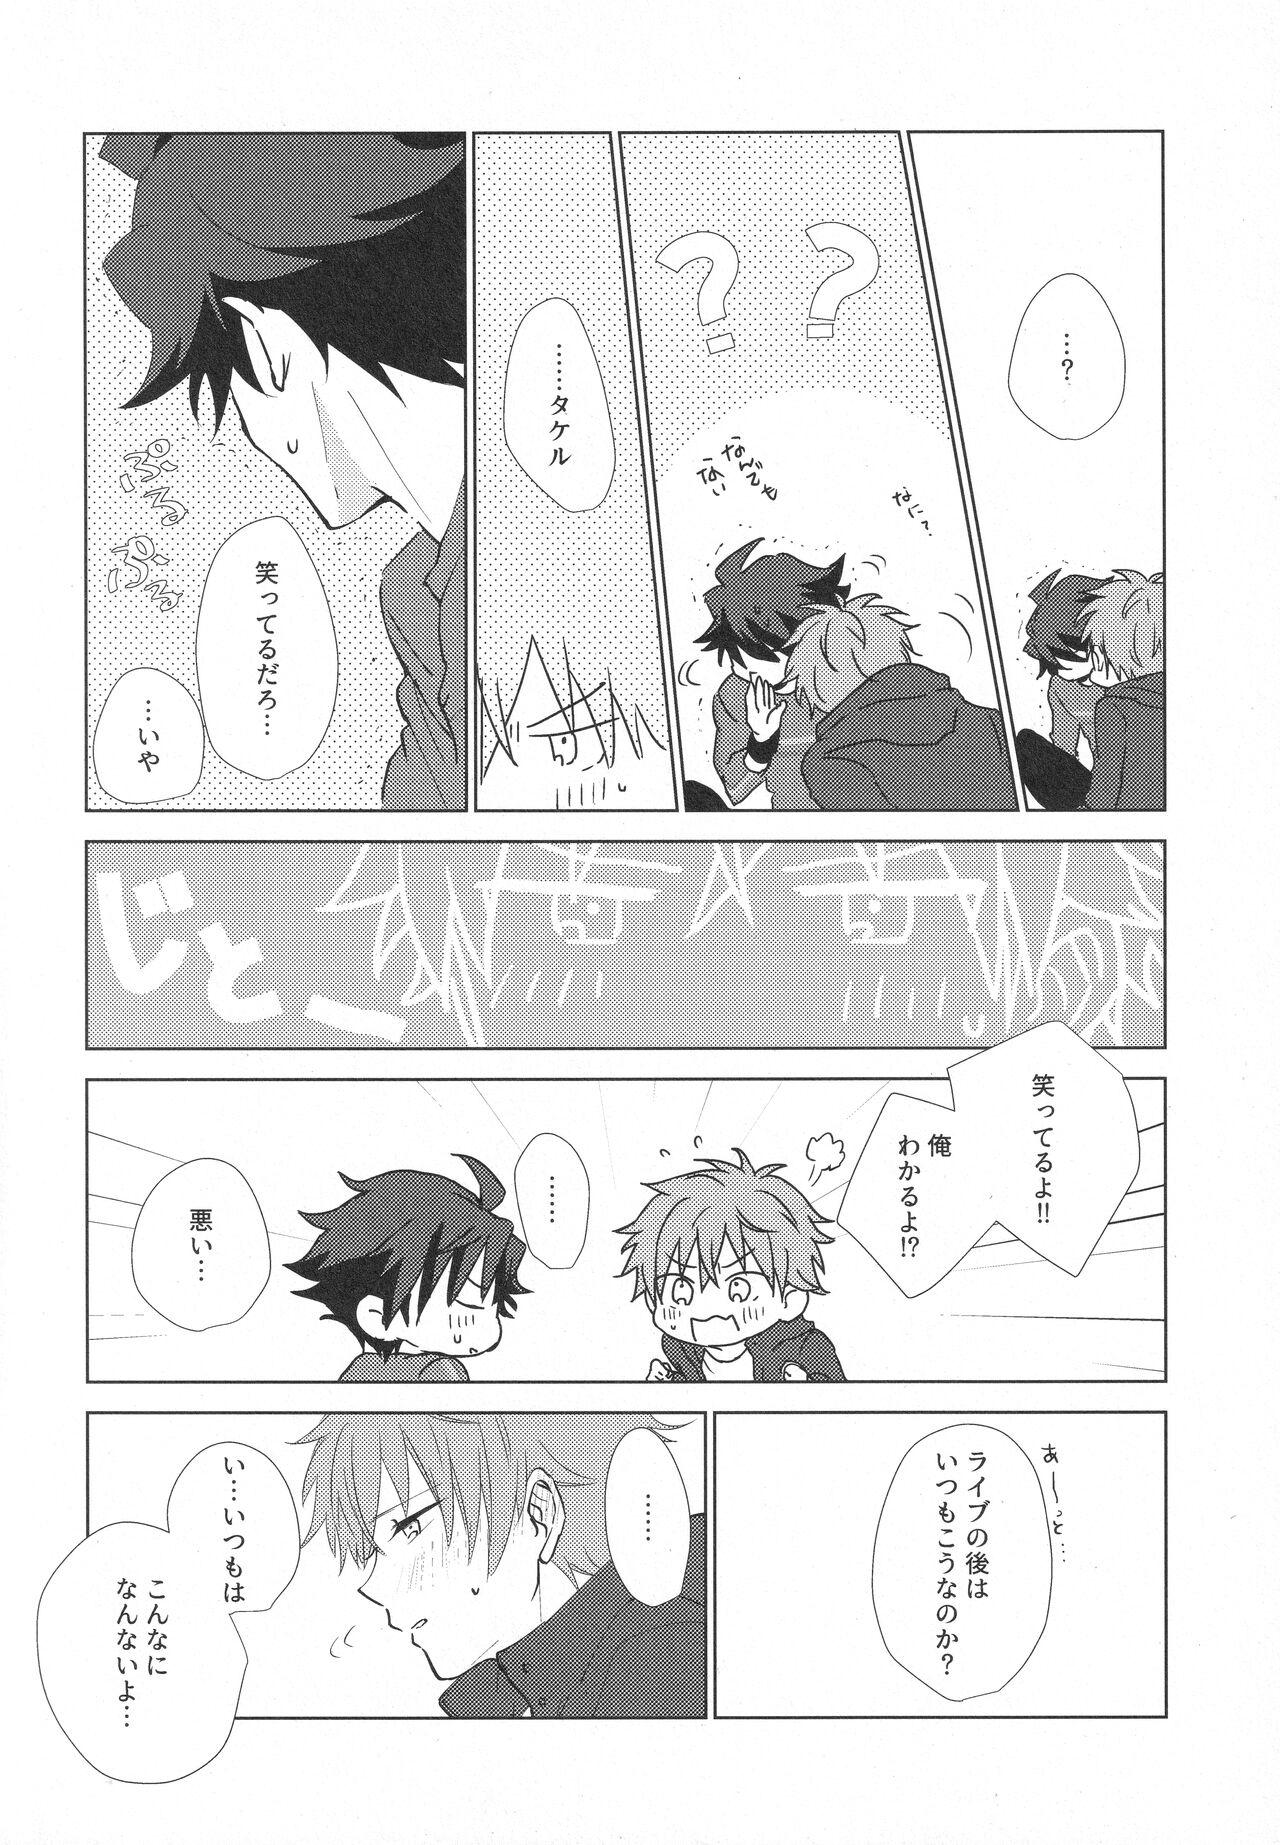 Behind Te to Te - The idolmaster sidem Comedor - Page 9